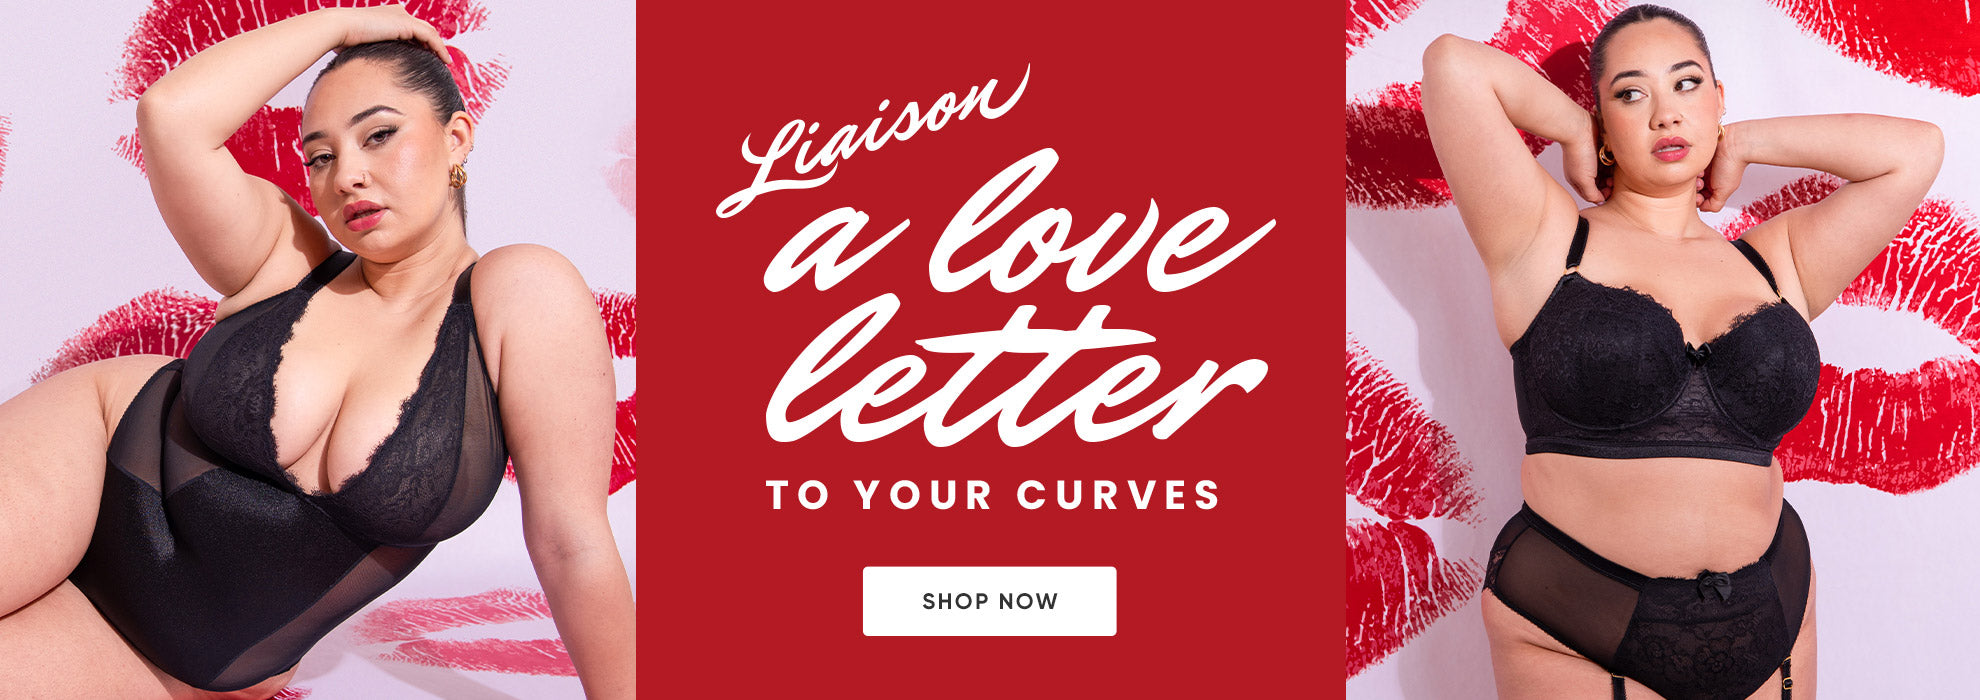 Liaison - A love letter to your curves